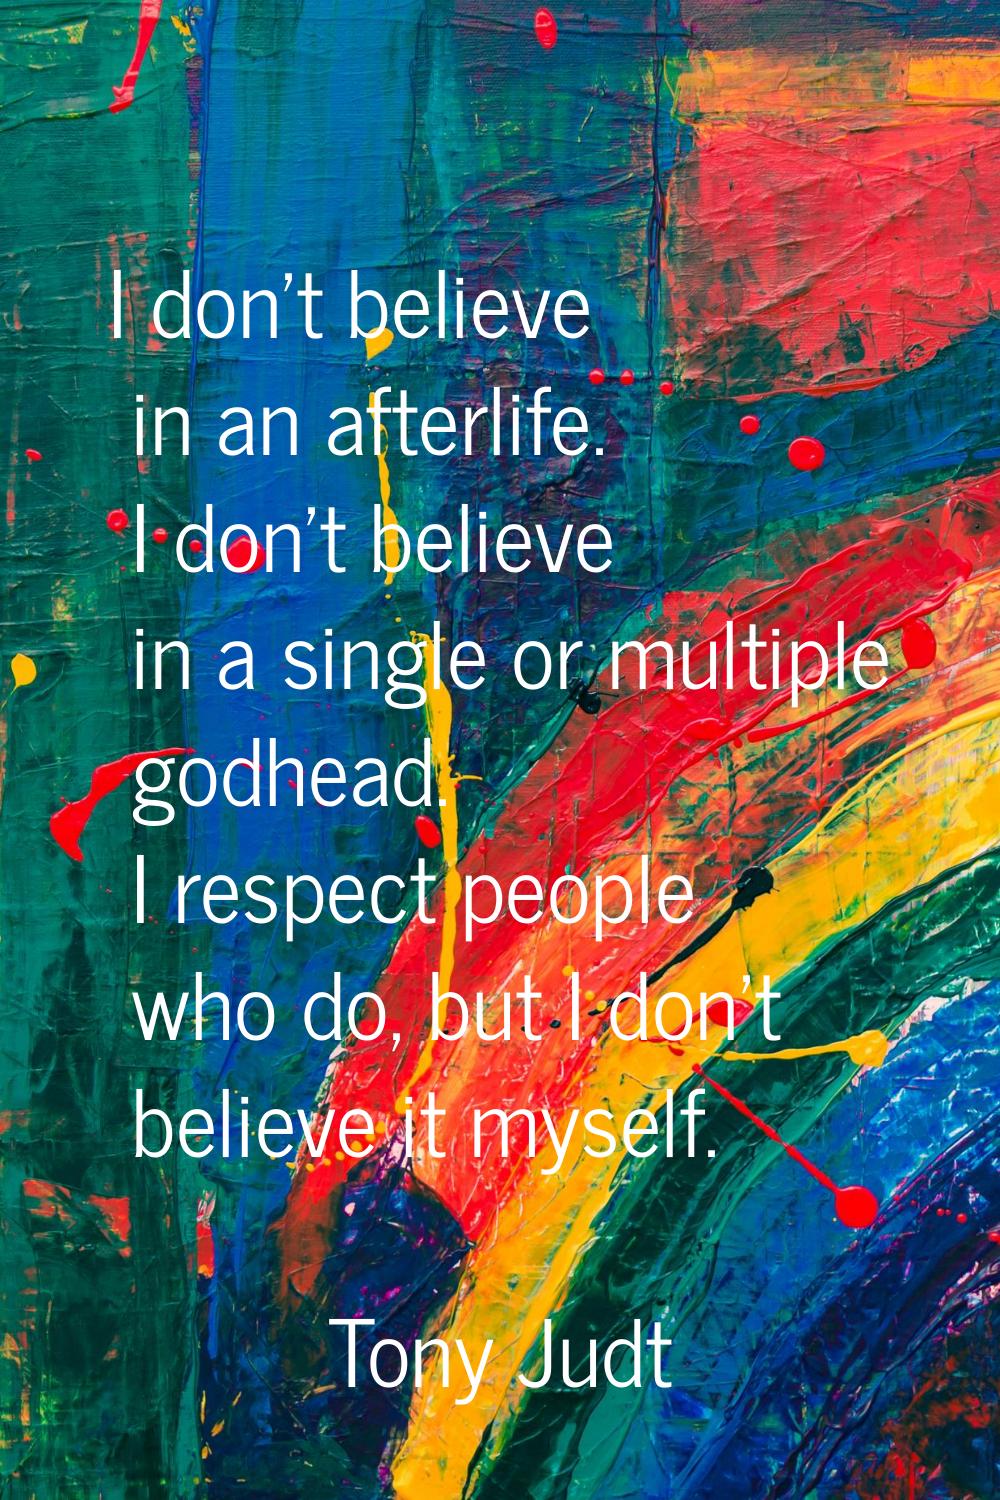 I don't believe in an afterlife. I don't believe in a single or multiple godhead. I respect people 